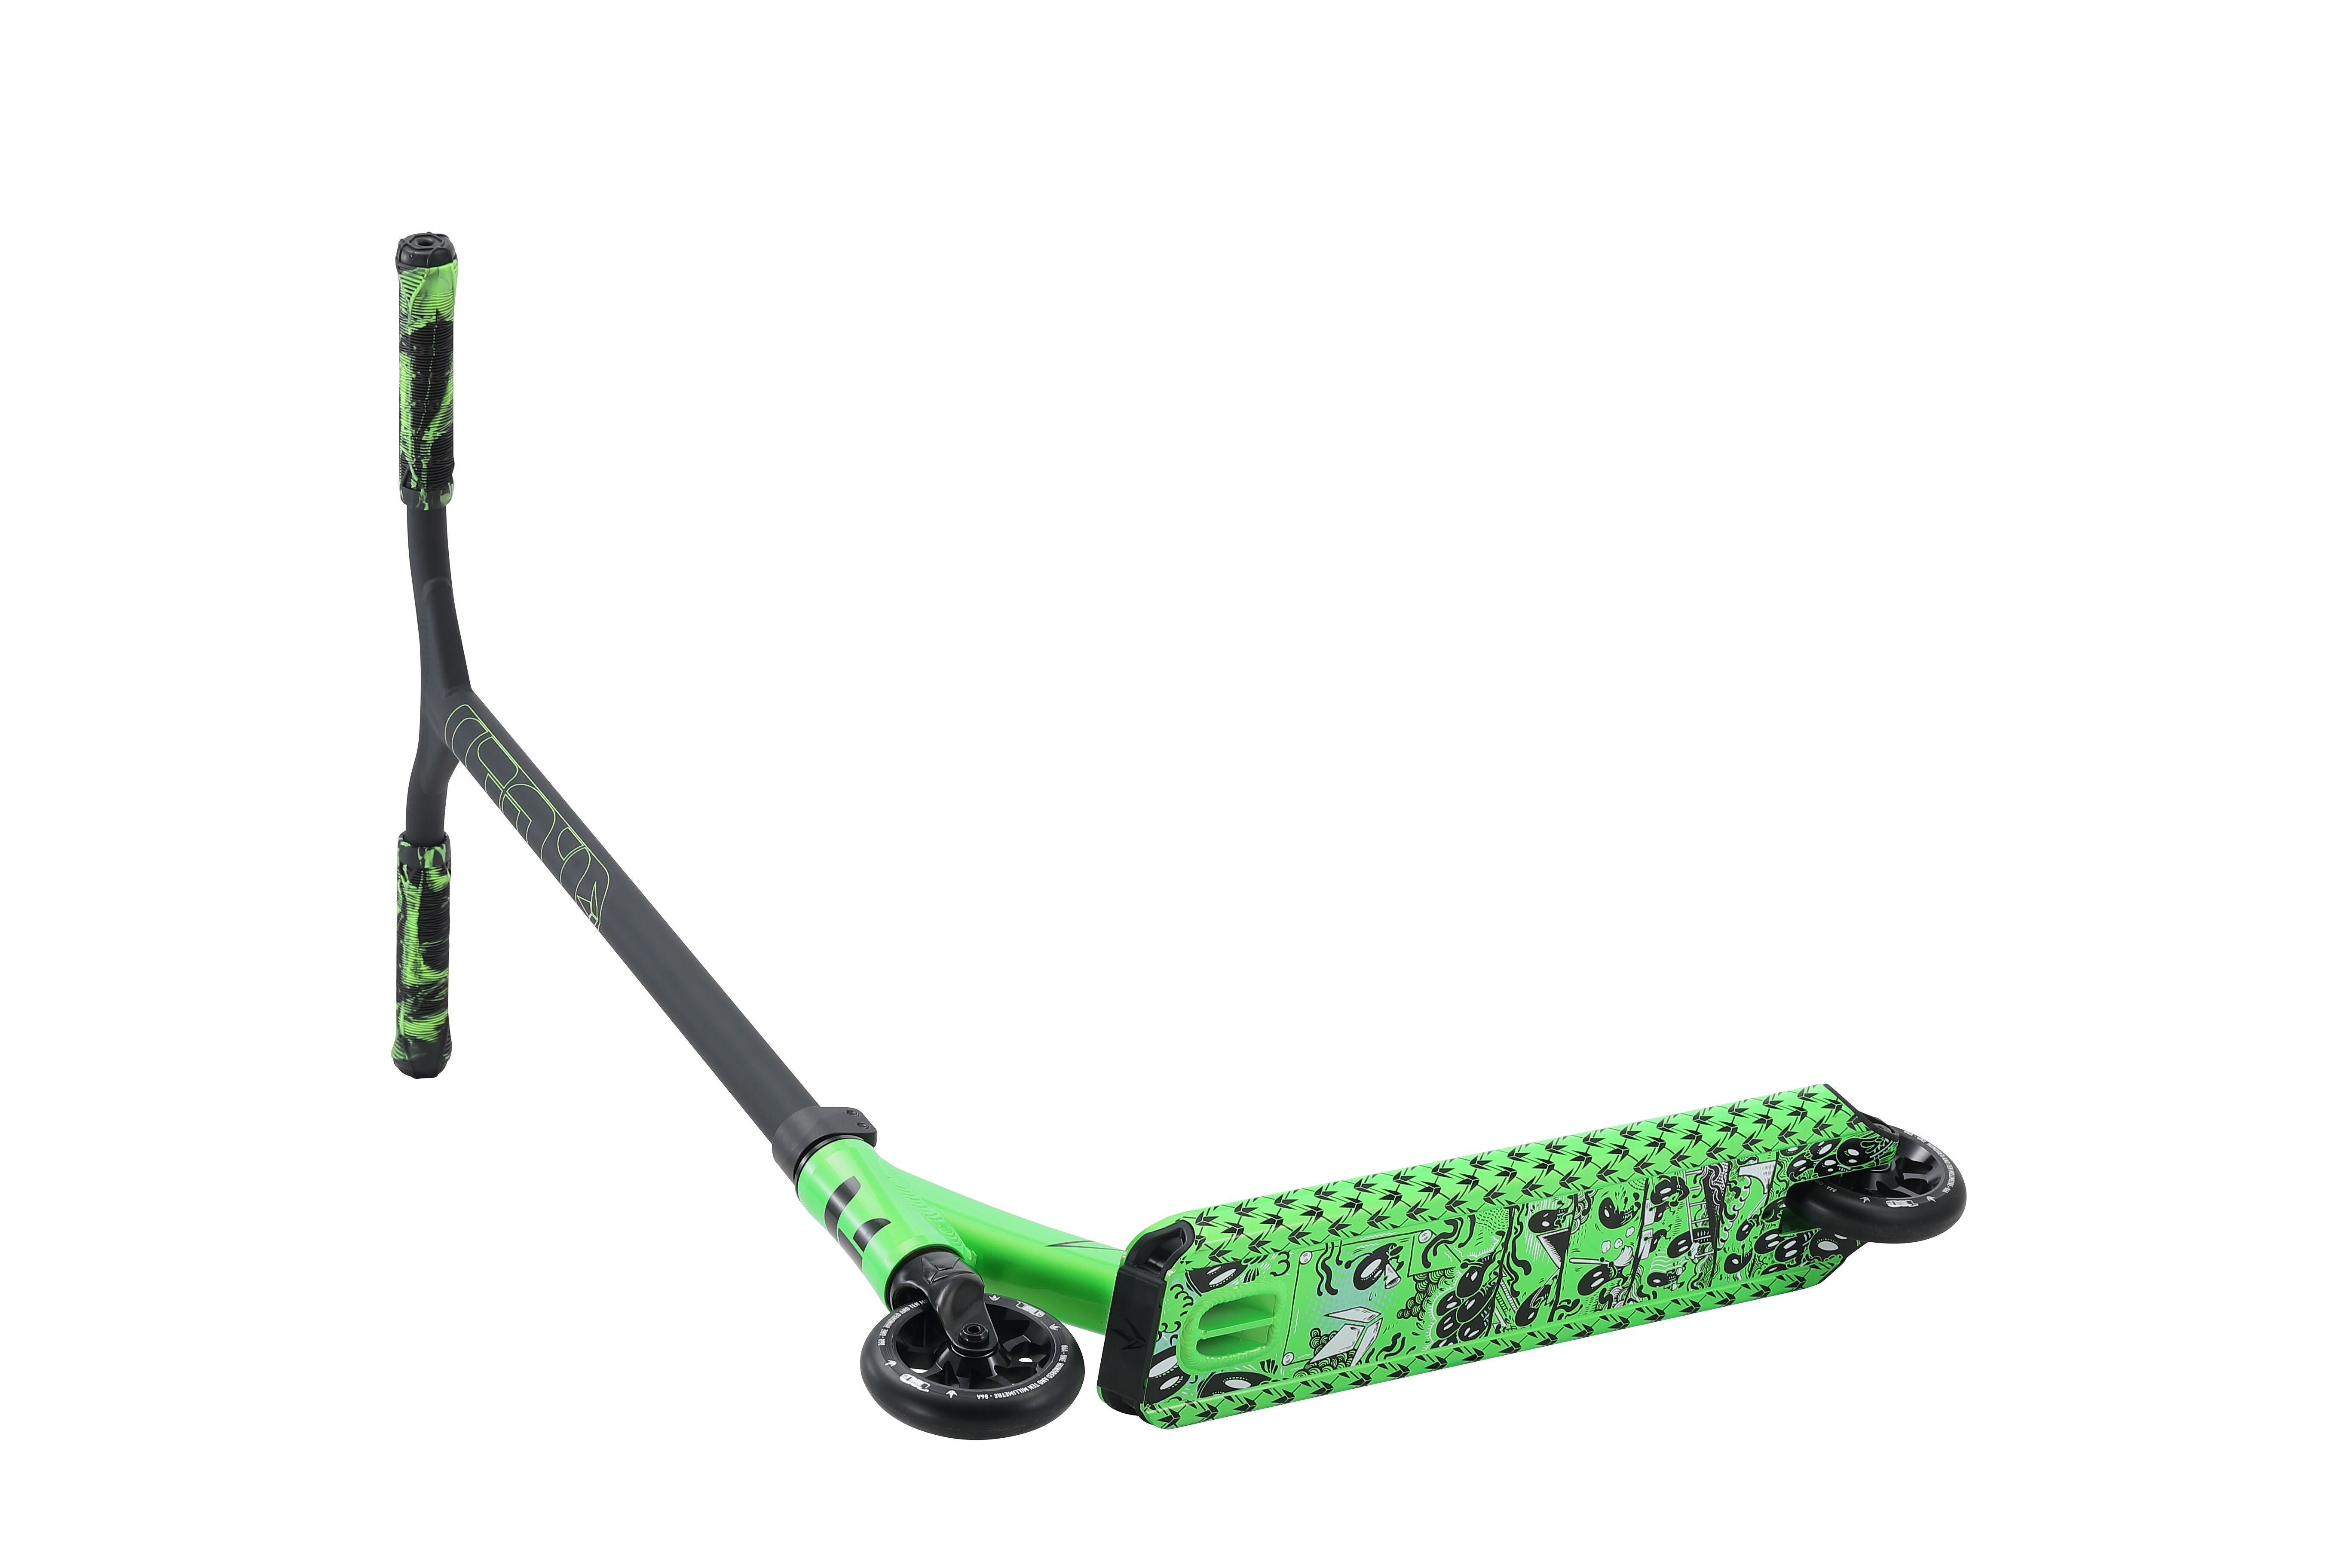 Envy Colt S4 - Scooter Complete Green Bottom View